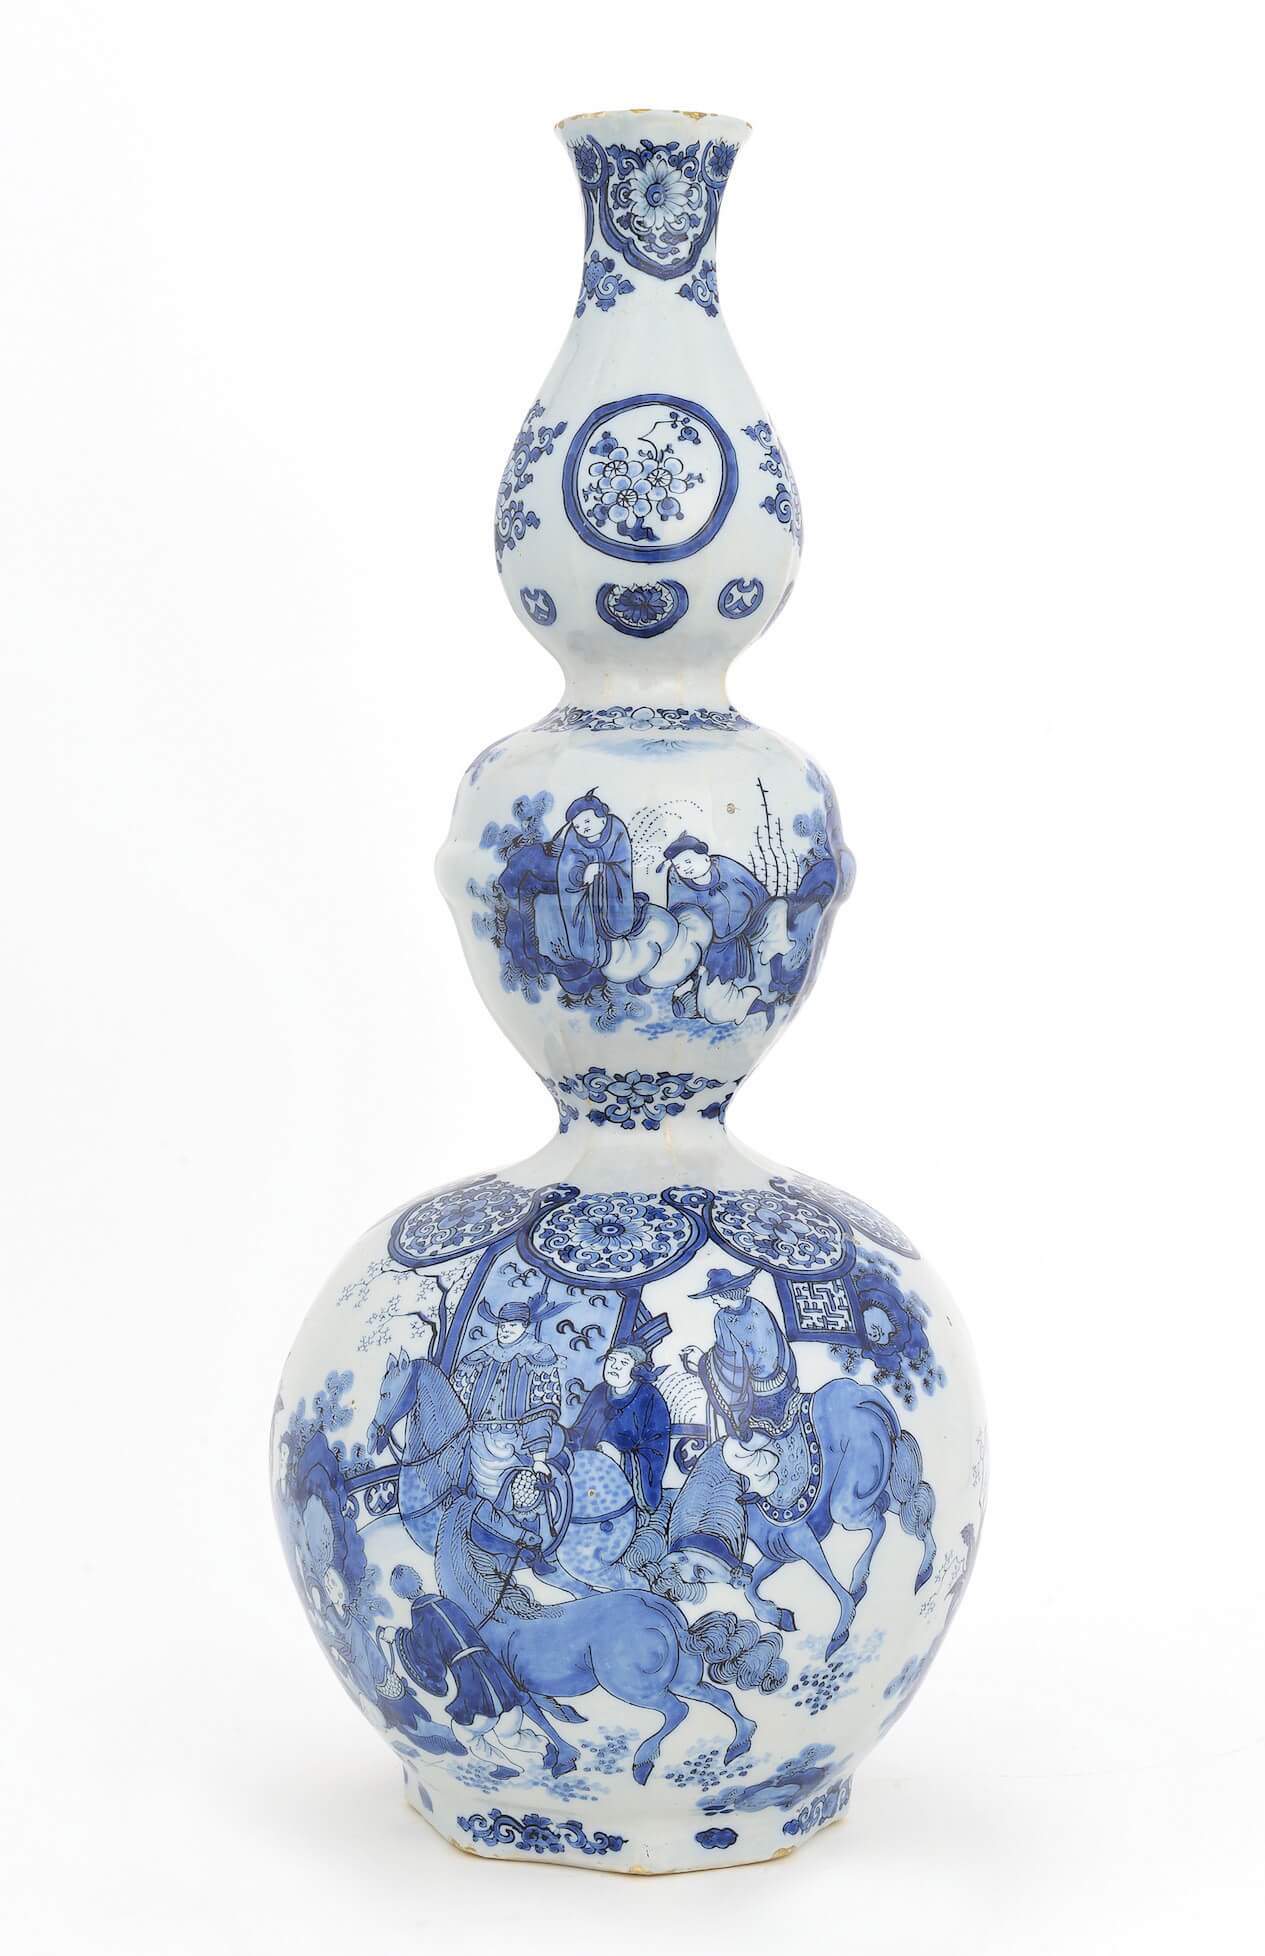 •D1304. Blue and White Large Triple-Gourd-Shaped Vase